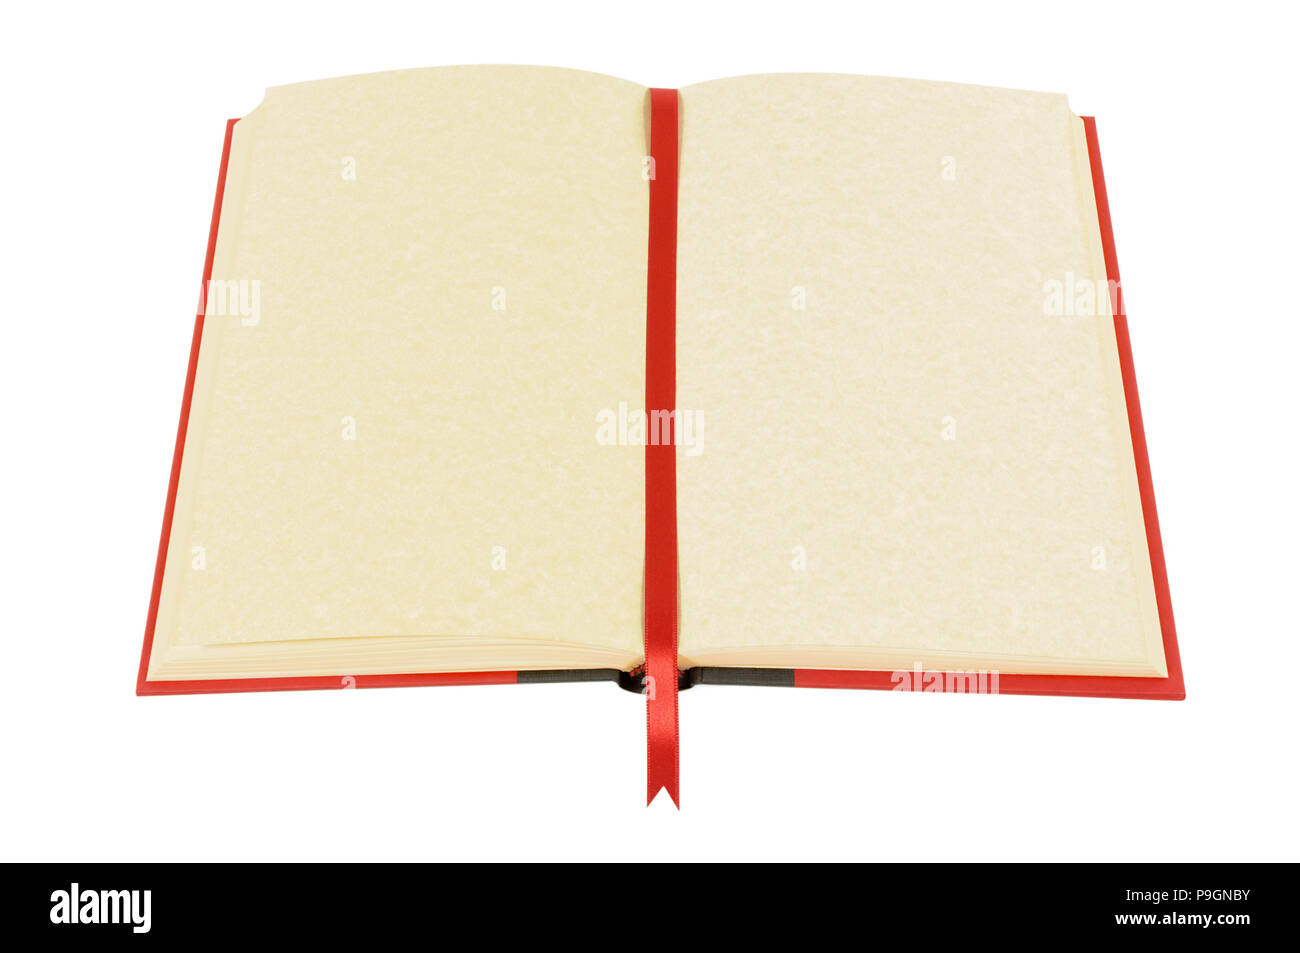 Red Bookmark Ribbon Stock Illustration - Download Image Now